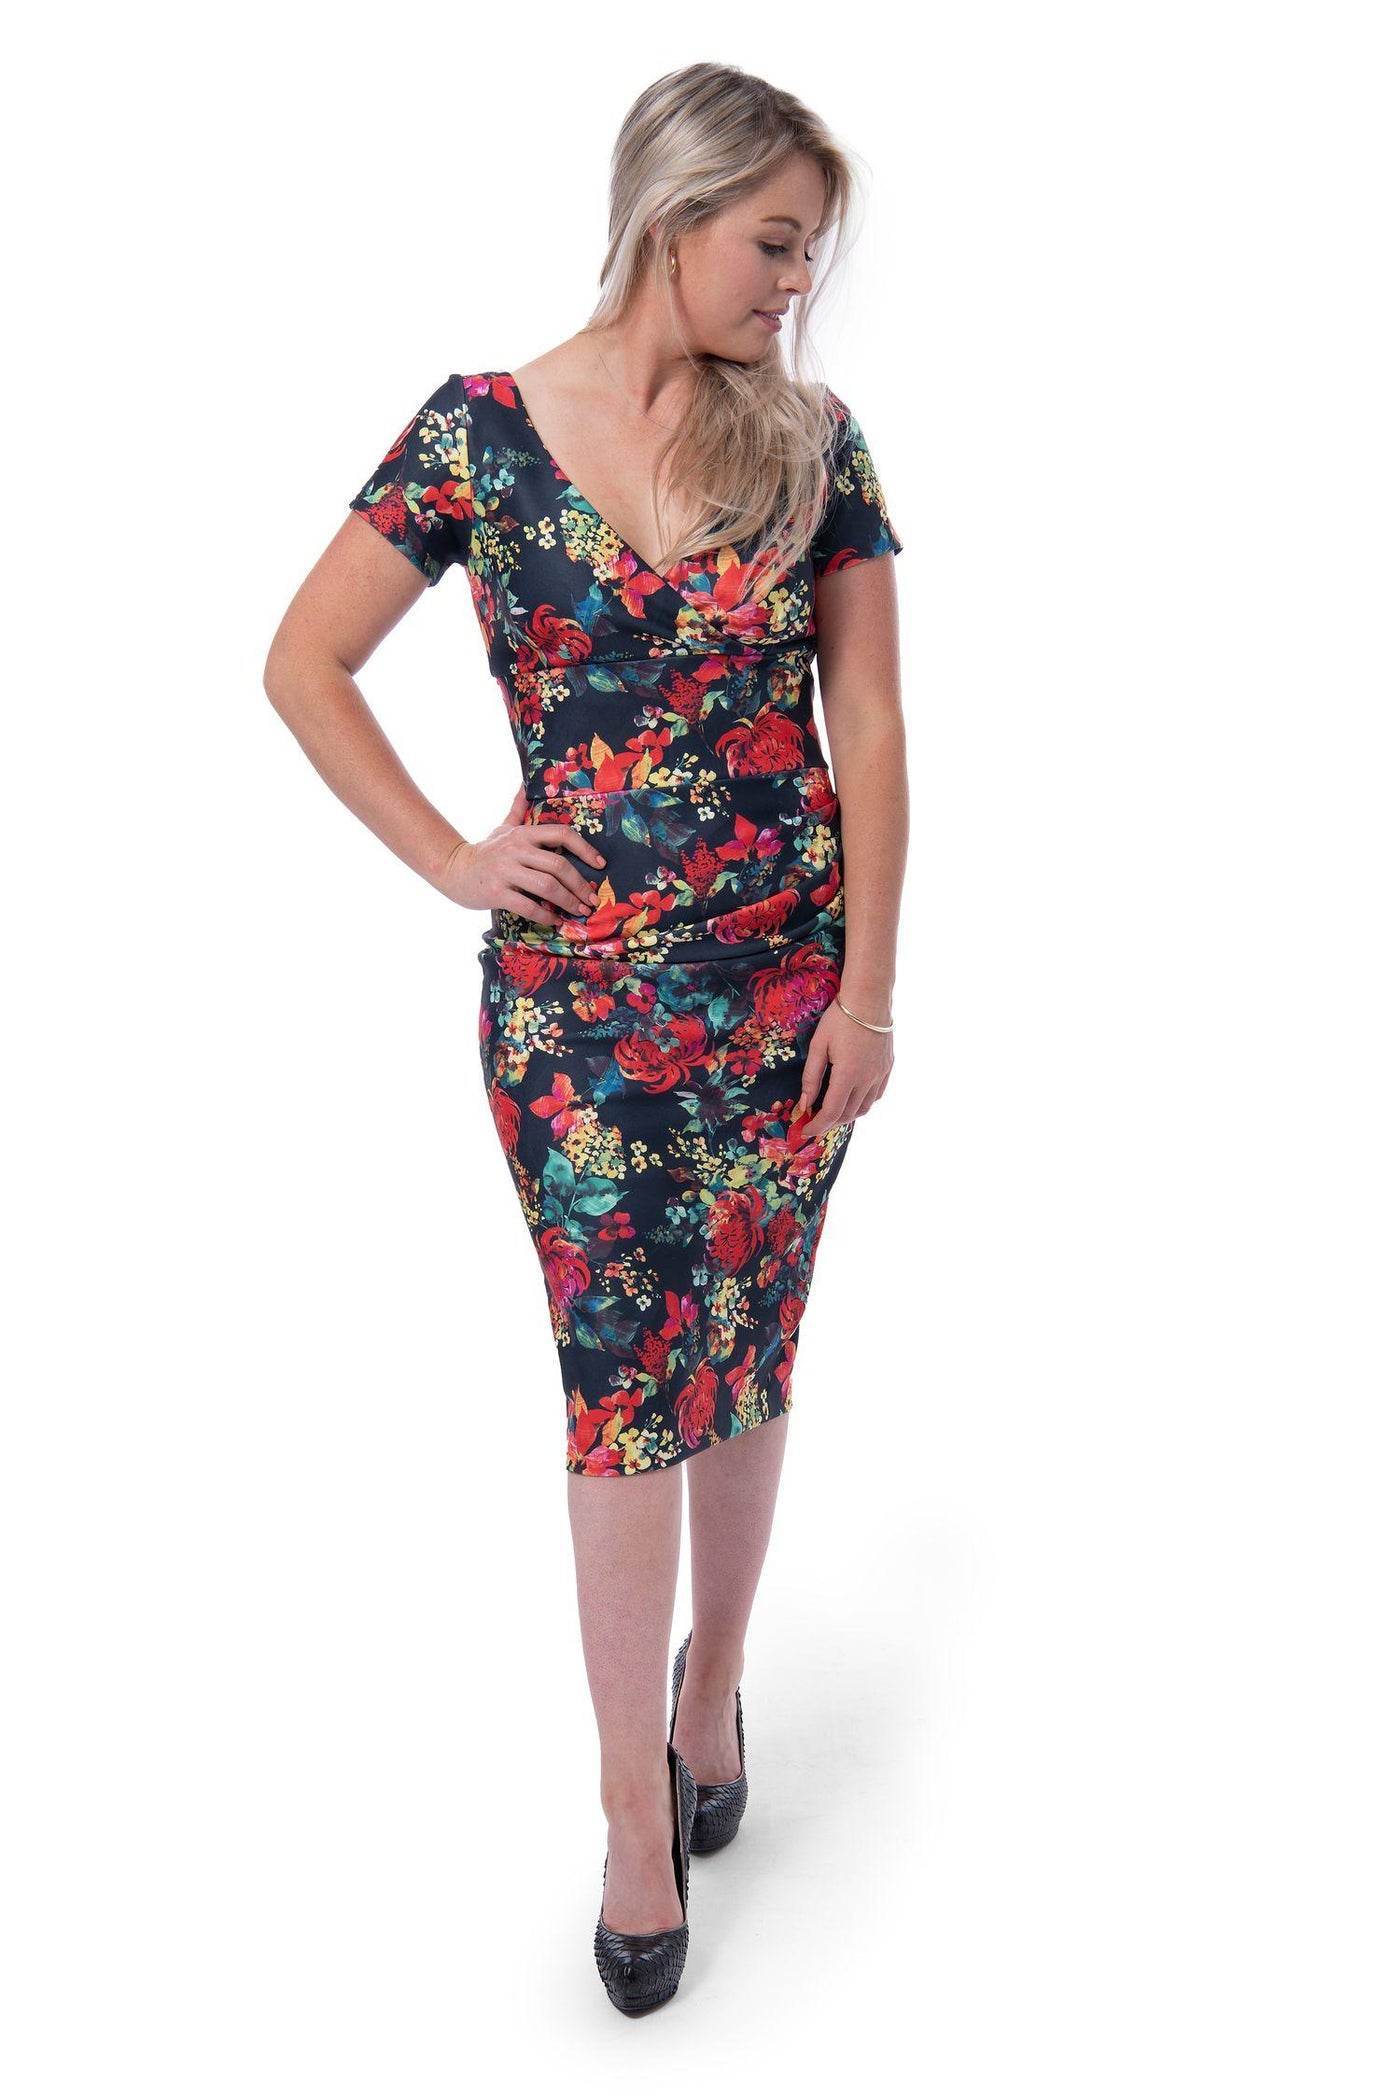 Black Dress With Bold Floral Pattern